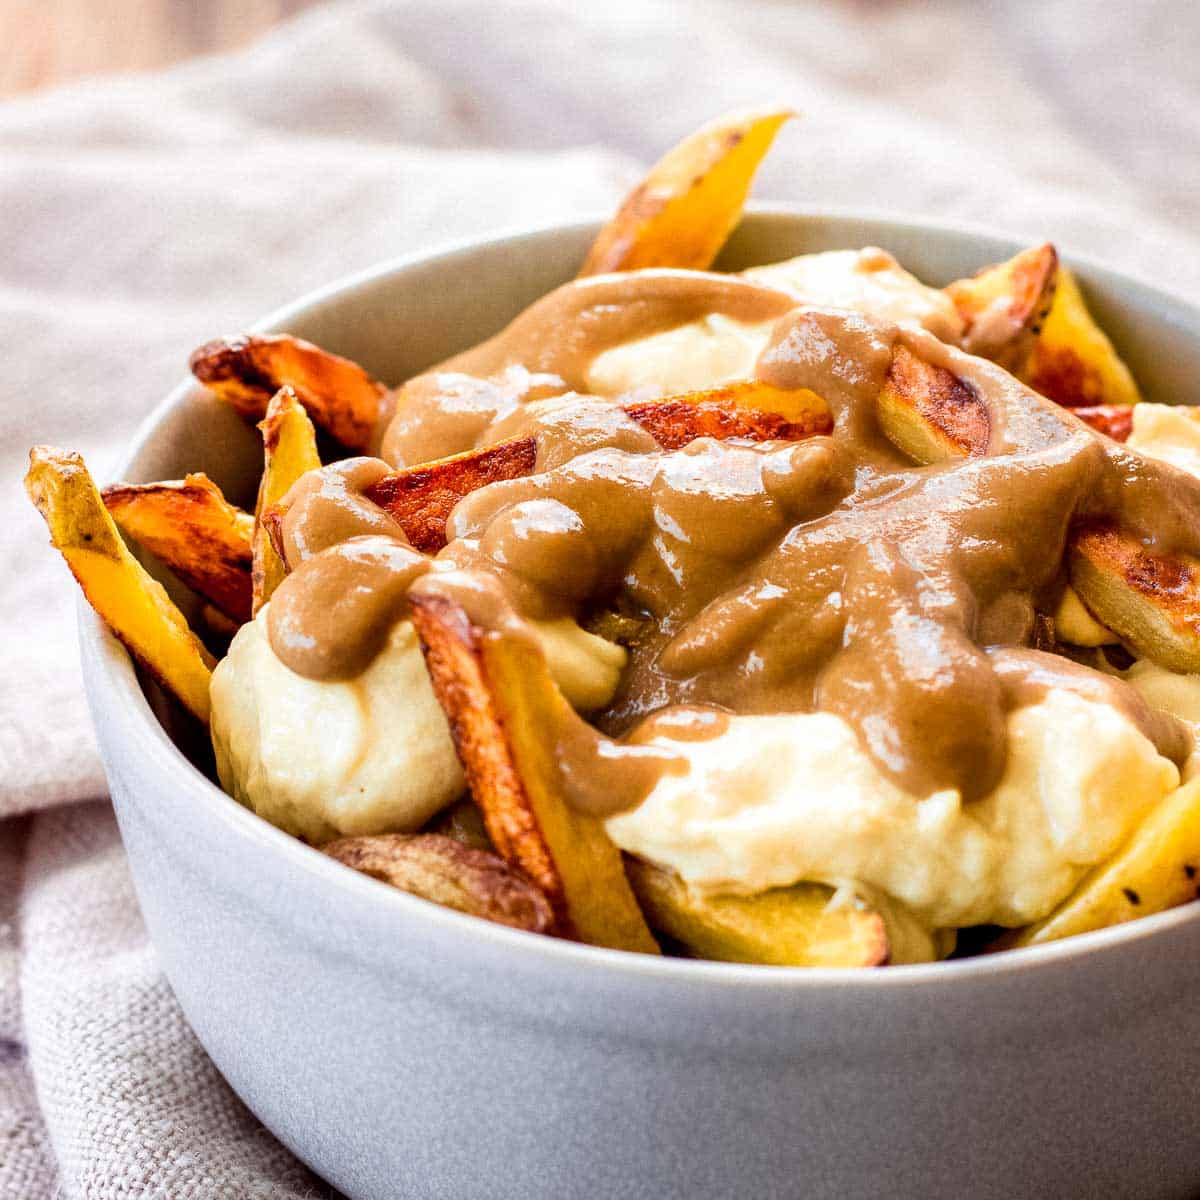 Grey bowl of vegan poutine topped with cheese curds and gravy.